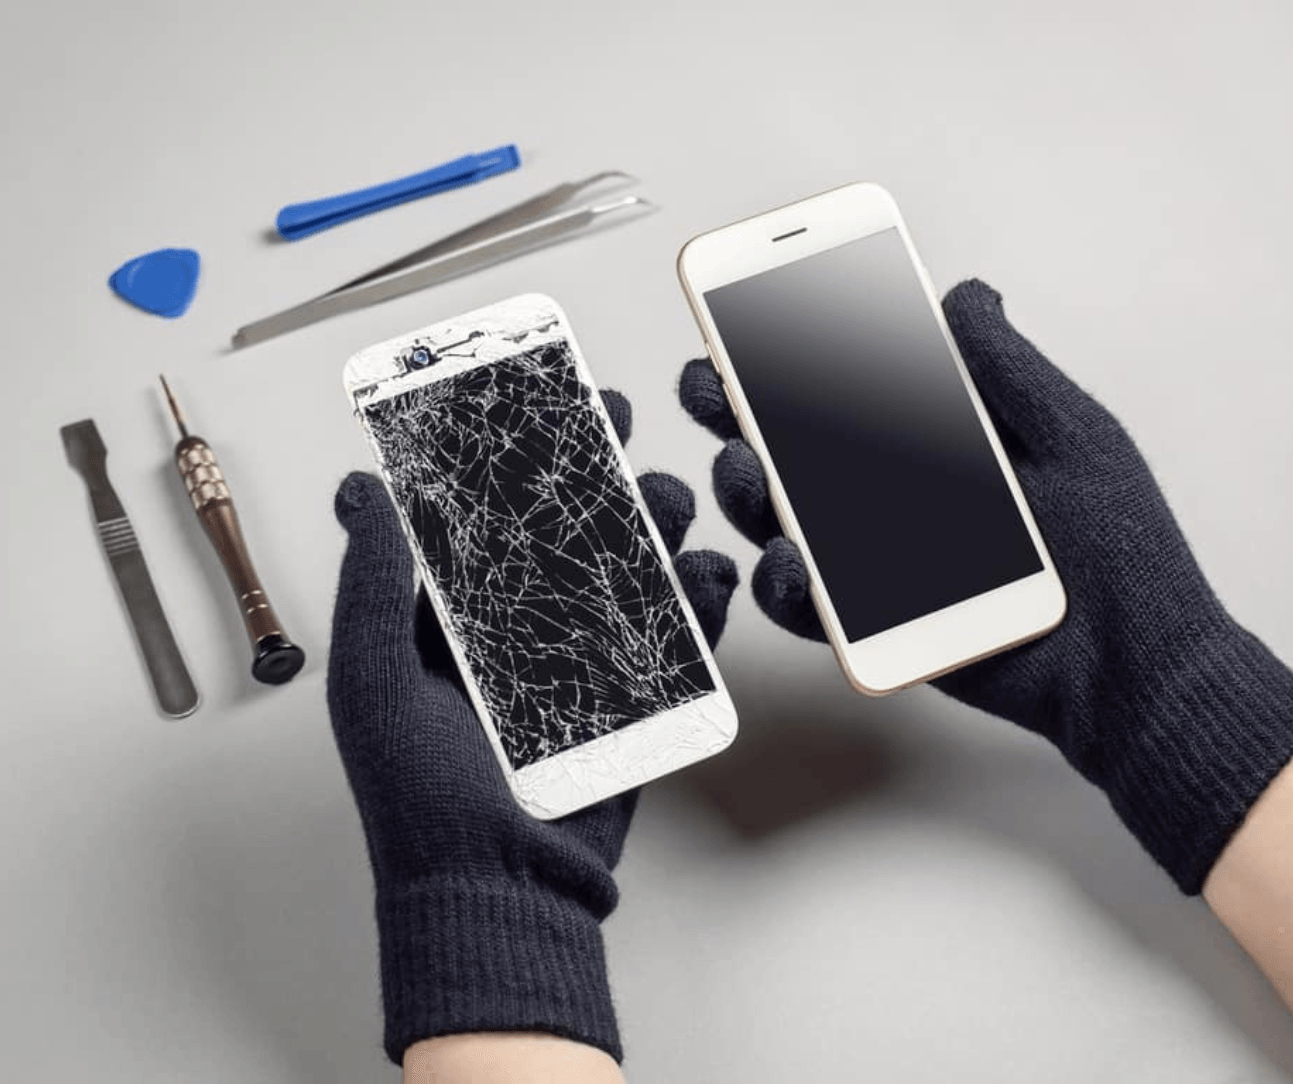 The Benefits of Refurbished Phones: Why Buying Refurbished is the Smart Choice - Want a New Gadget